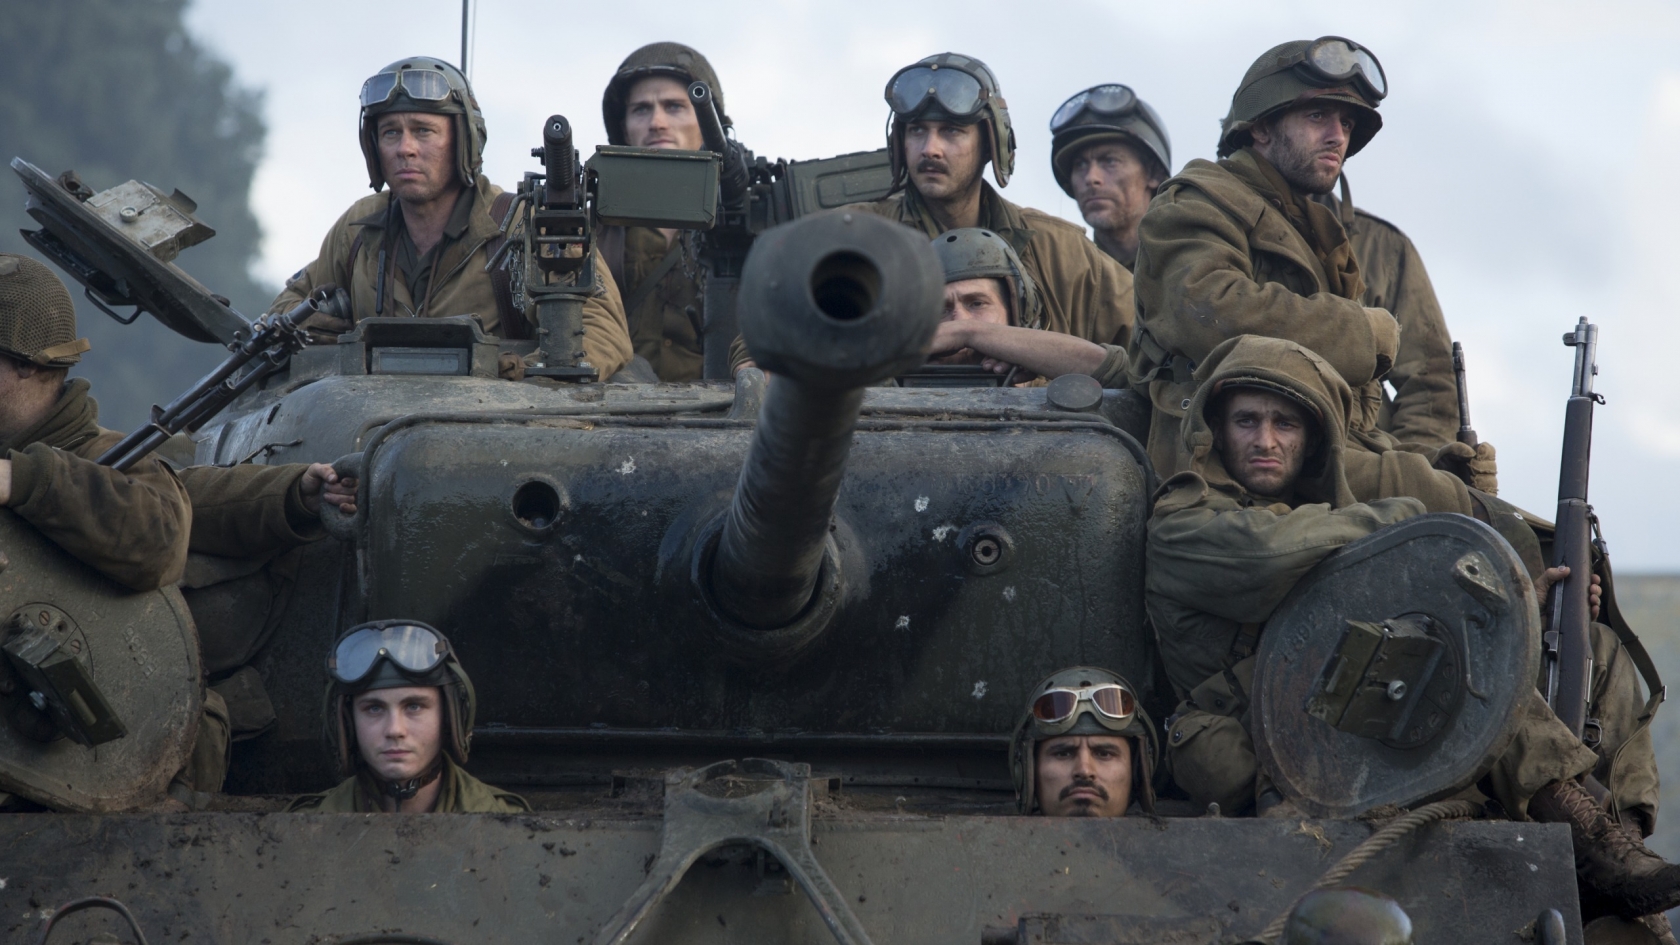 Fury Movie 2014 for 1680 x 945 HDTV resolution